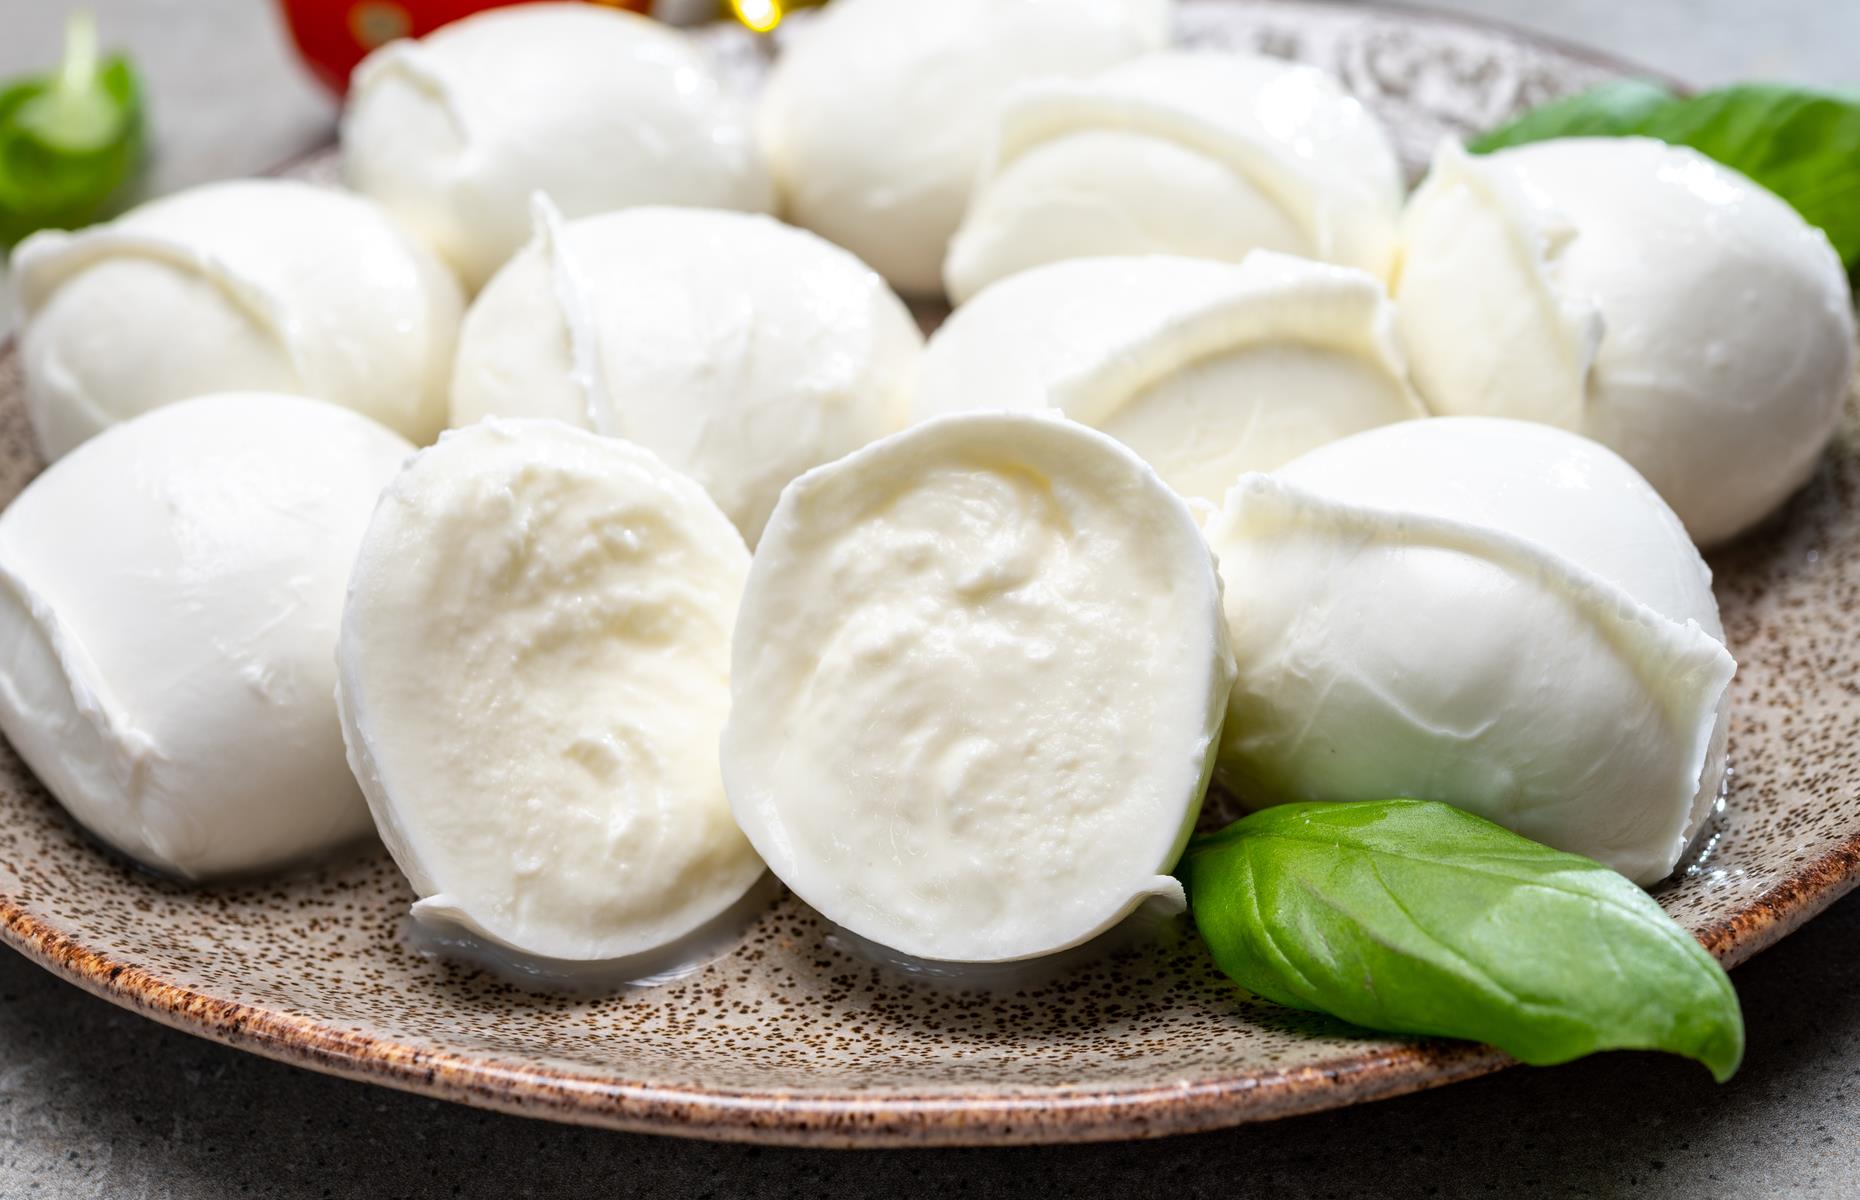 <p>For an authentic Italian pizza, buffalo mozzarella is the cheese of choice. And when making a classic margherita, Parmesan is also used, to add a salty, more savory flavor to the relatively neutral mozzarella. Other good melting cheeses are provolone, fontina and Cheddar, which can be combined with buffalo mozzarella. Ensure to drain fresh mozzarella well before using it on pizza.</p>  <p><a href="https://www.lovefood.com/recipes/59848/authentic-margherita-pizza-recipe"><strong>Get the recipe for classic margherita pizza here</strong></a></p>